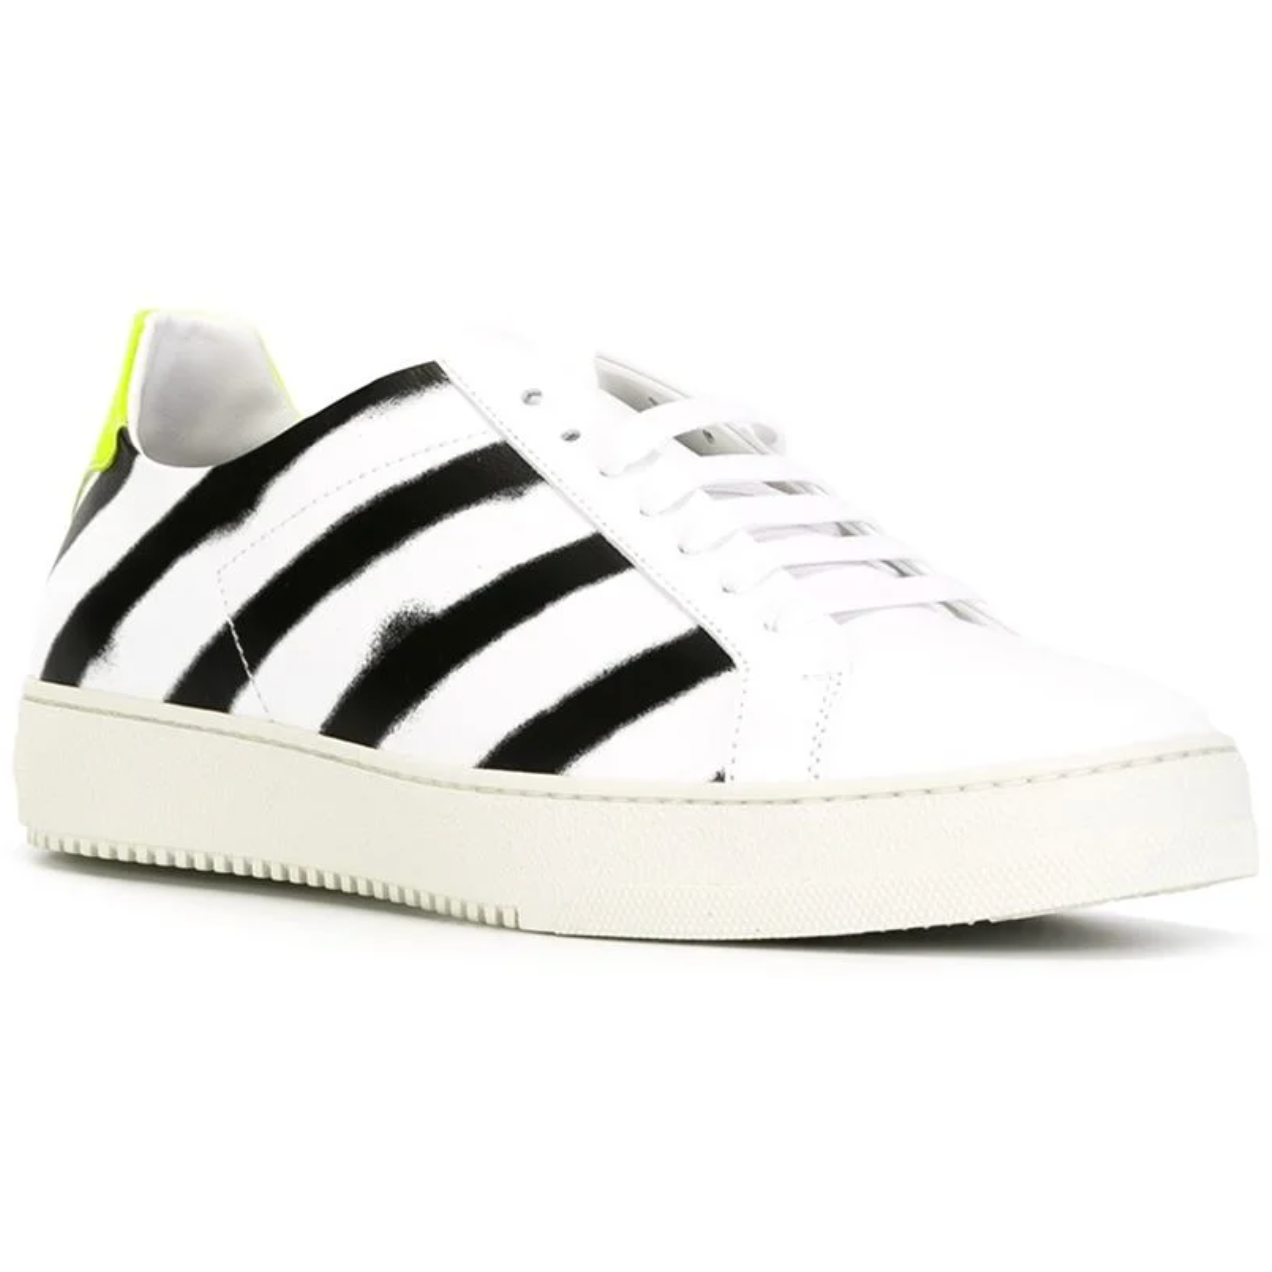 Off-White Spray Paint Splash White Sneakers white-leather-sneakers product-9094-78854192-cdc37b67-a50.png